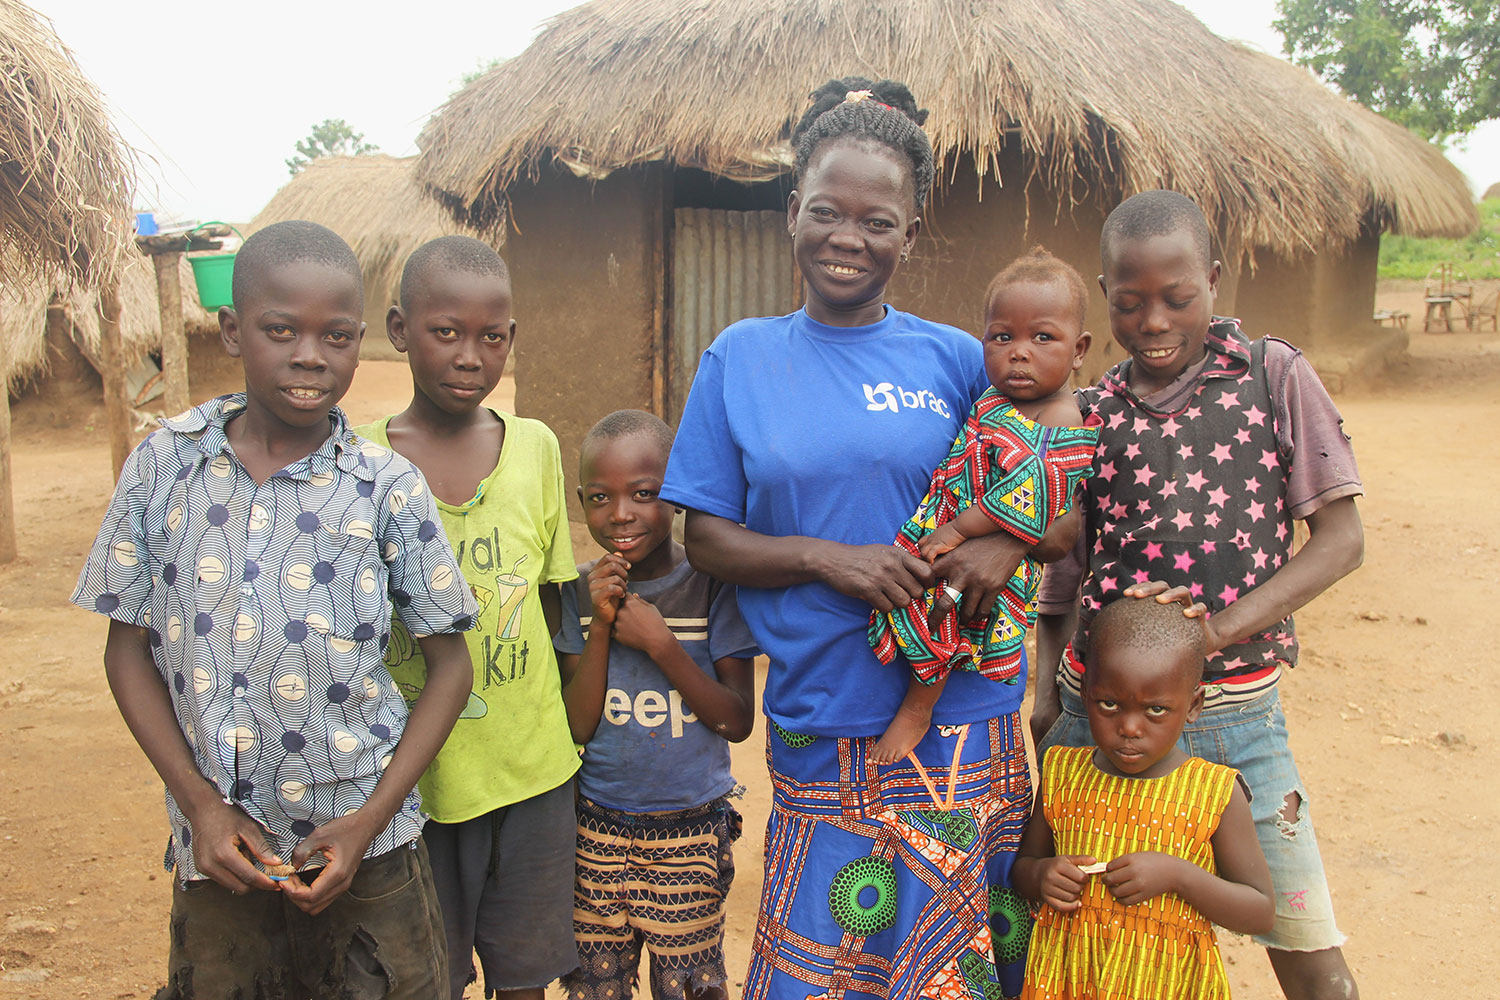 Edina, a South Sudanese refugee living in Uganda, poses with her family